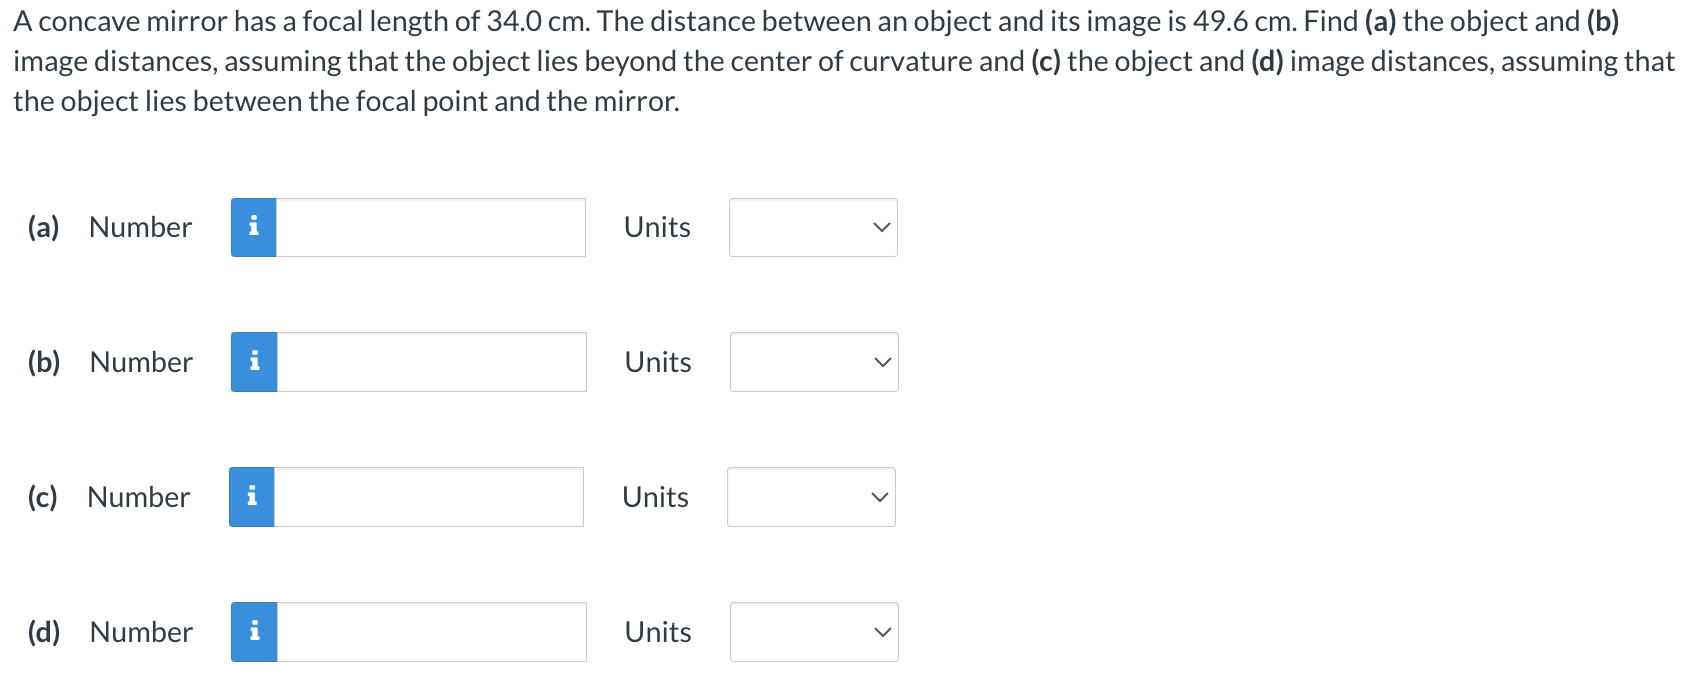 A concave mirror has a focal length of 34.0 cm. The distance between an object and its image is 49.6 cm. Find (a) the object and (b) image distances, assuming that the object lies beyond the center of curvature and (c) the object and (d) image distances, assuming that the object lies between the focal point and the mirror. (a) Number Units (b) Number Units (c) Number Units (d) Number Units Units